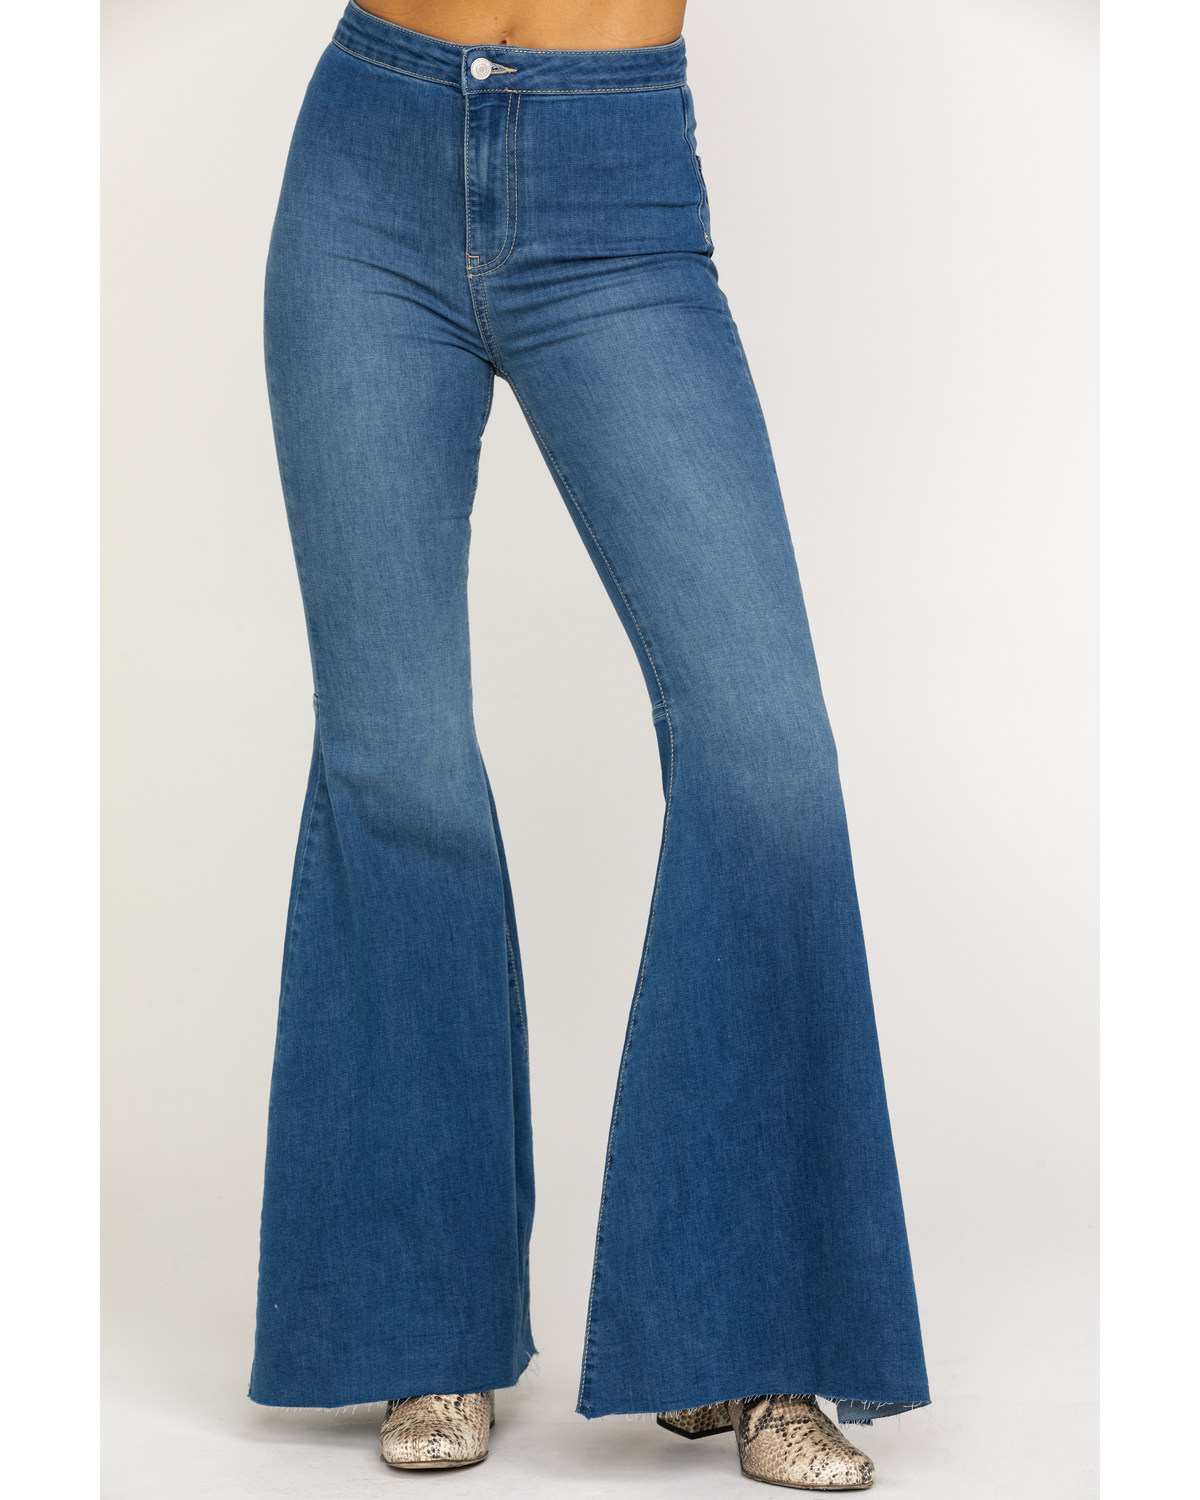 Free People Women's Dark Just Float on Flare Jeans | Boot Barn